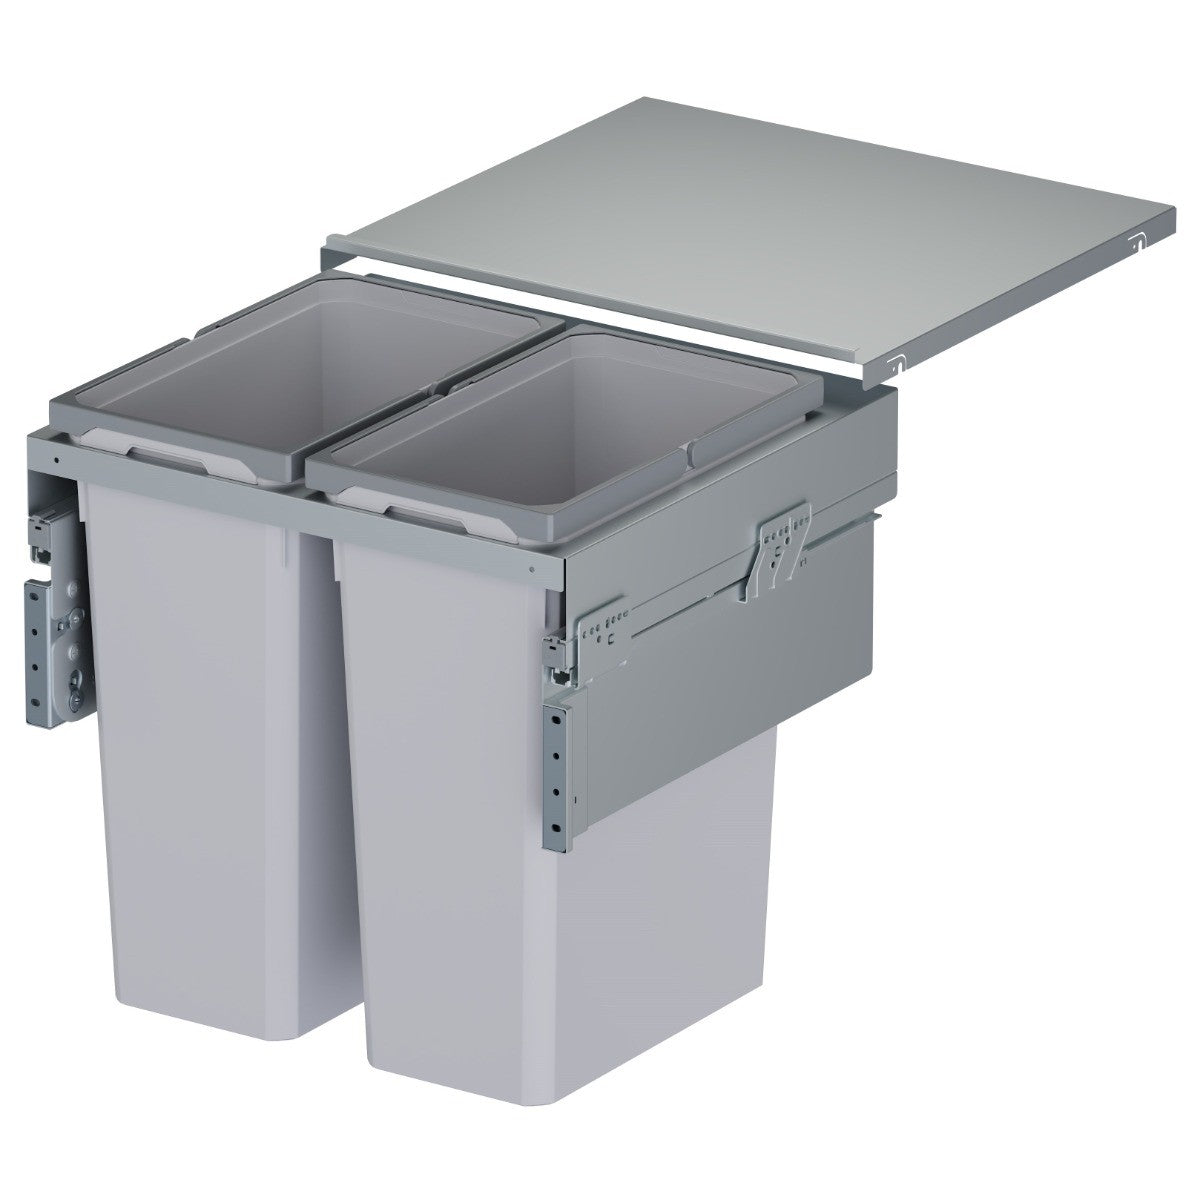 Dual-compartment Vauth-Sagel integrated kitchen bin, in silver grey colourway, for waste segregation